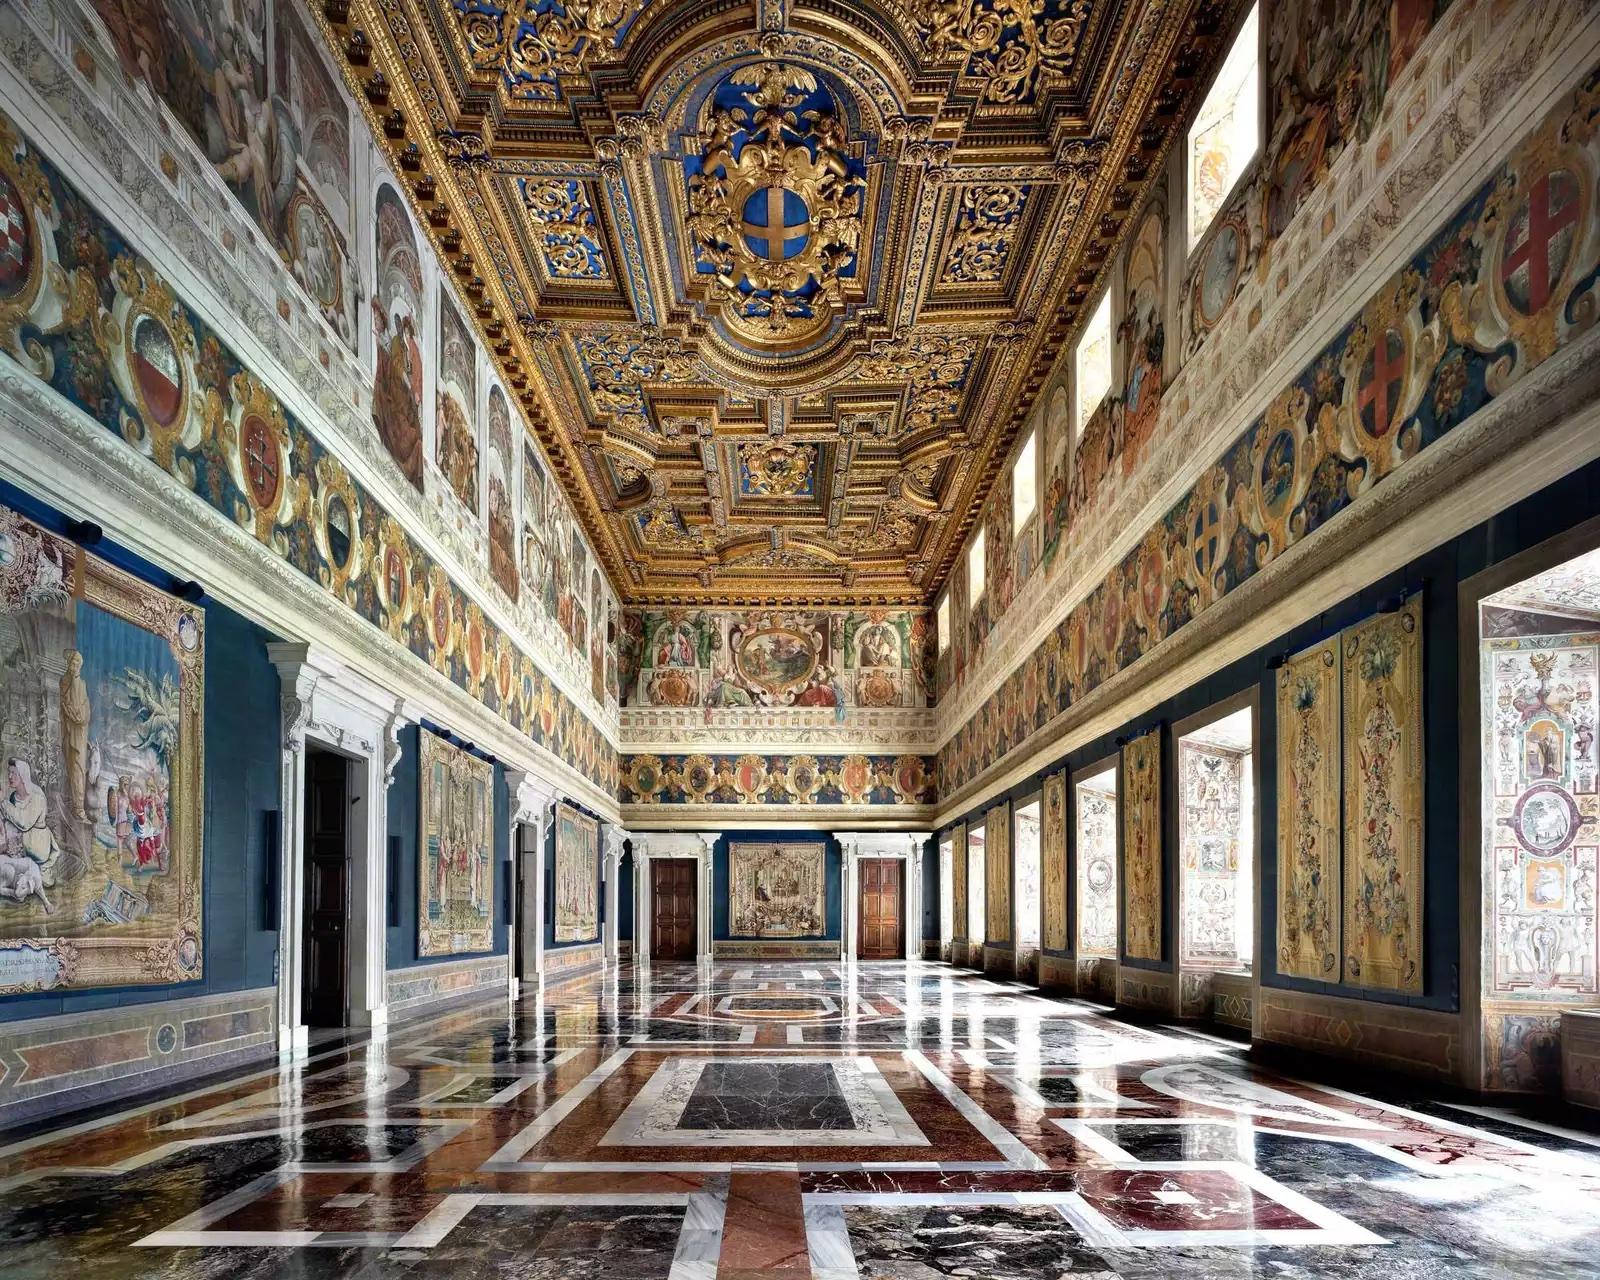 Museo Correr II, Venice, Italy, 2016
Chromogenic print
120 x 150 cm
Edition of 5

Italian, b. 1954, Florence, Italy, based in Florence, Italy Massimo Listri travels his native Italy and the world with his camera, photographing grand interior spaces